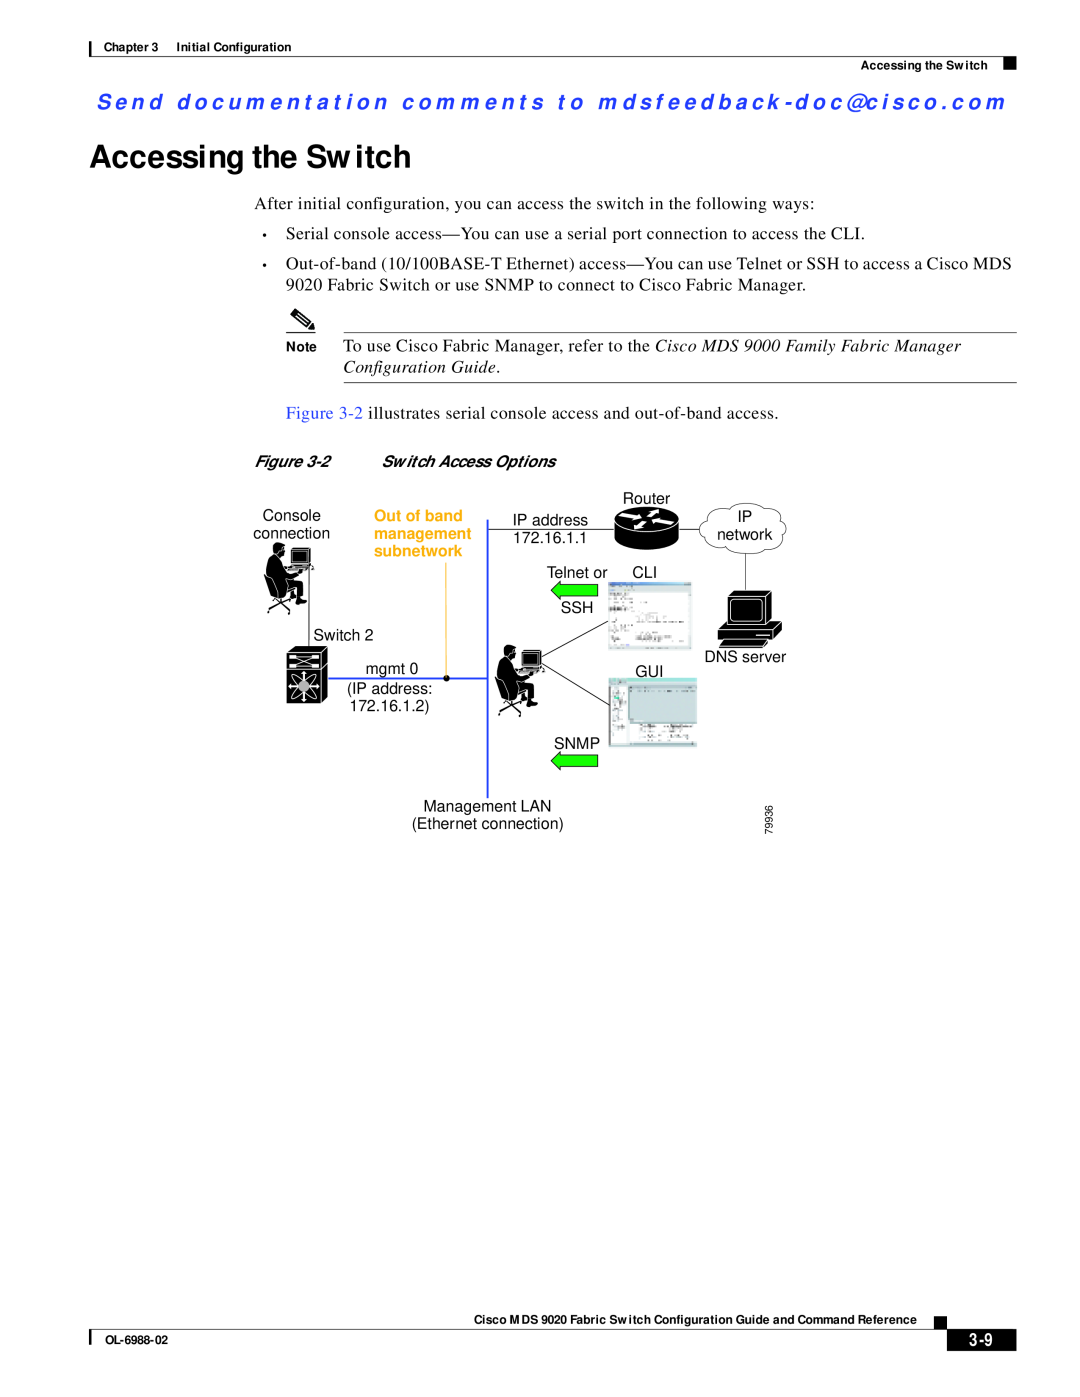 Cisco Systems MDS 9020 manual Accessing the Switch, Configuration Guide 